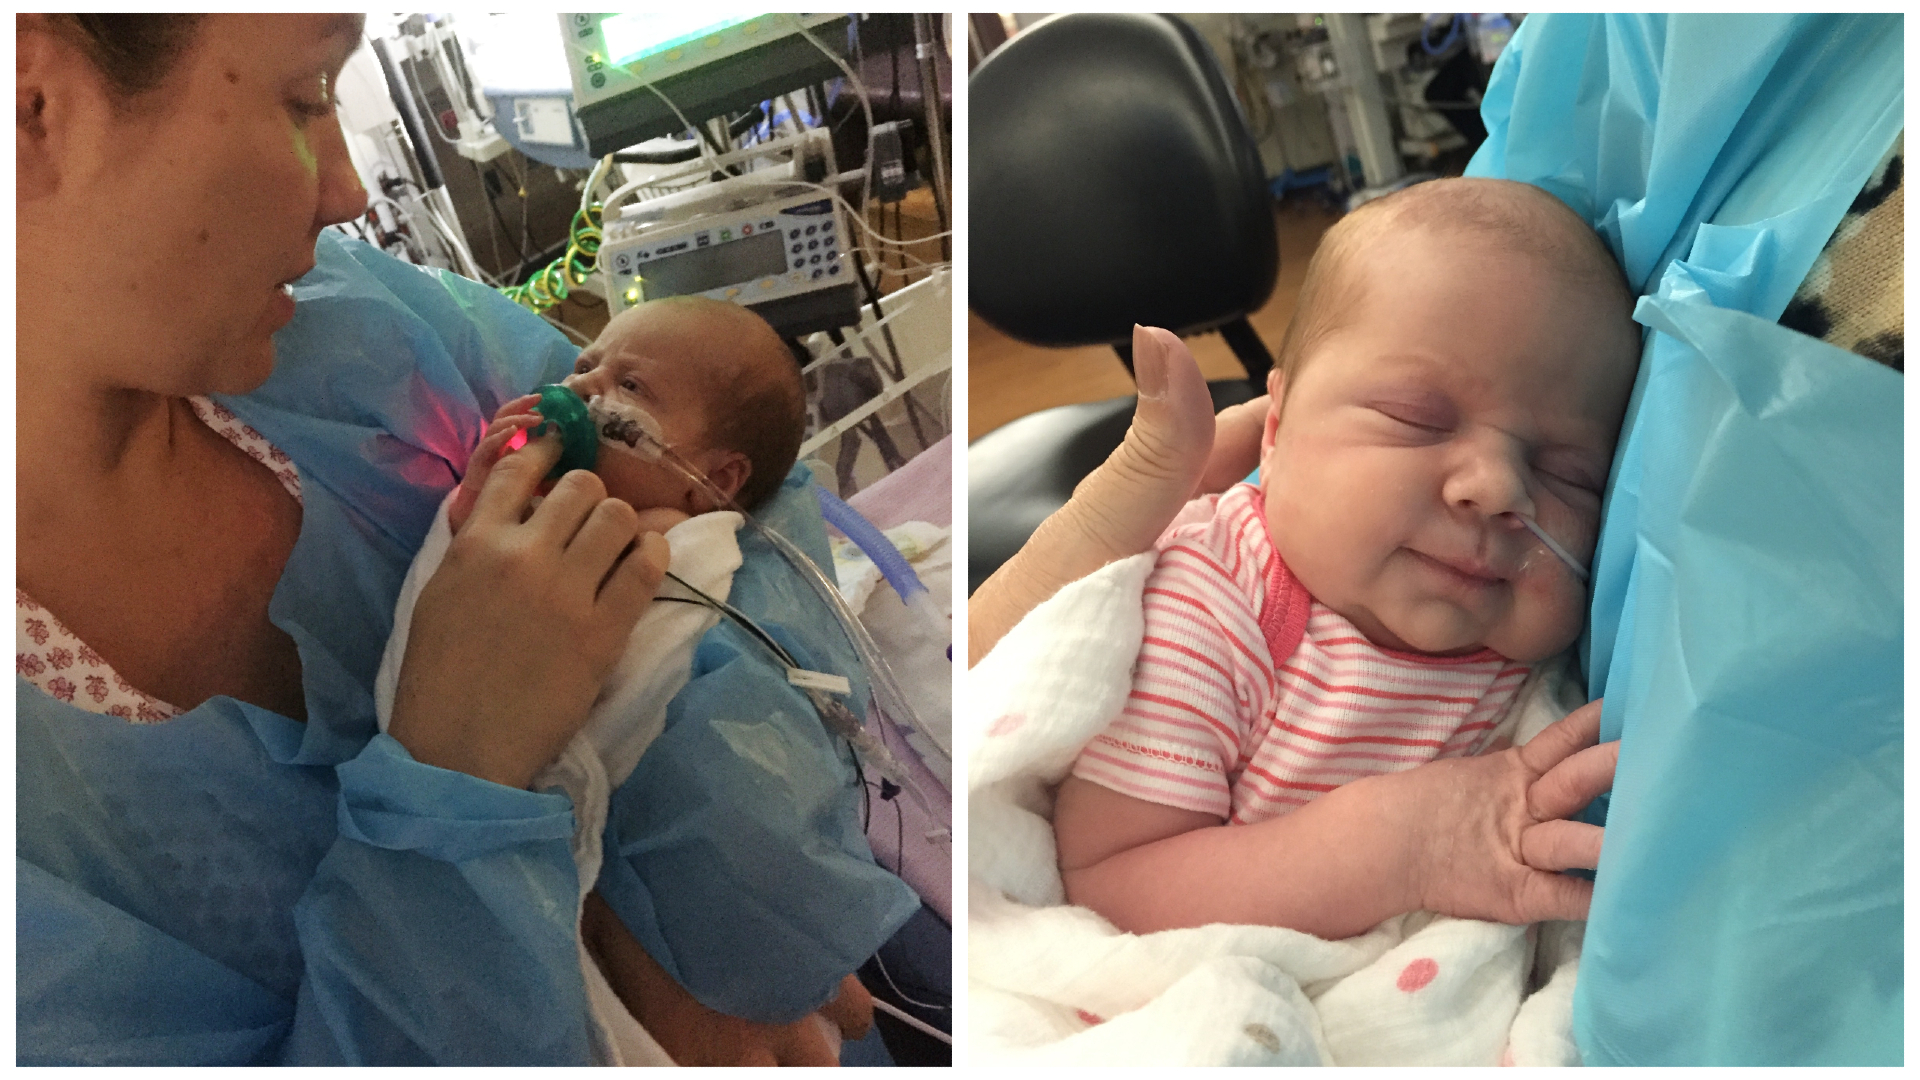 For more than a decade, the Seymour family has sought care from Atrium Health Women’s Care, Atrium Health Levine Children’s, and more. Learn how each area of the healthcare system has come together to offer lifesaving care for Kellen and her miracle baby, Layne.